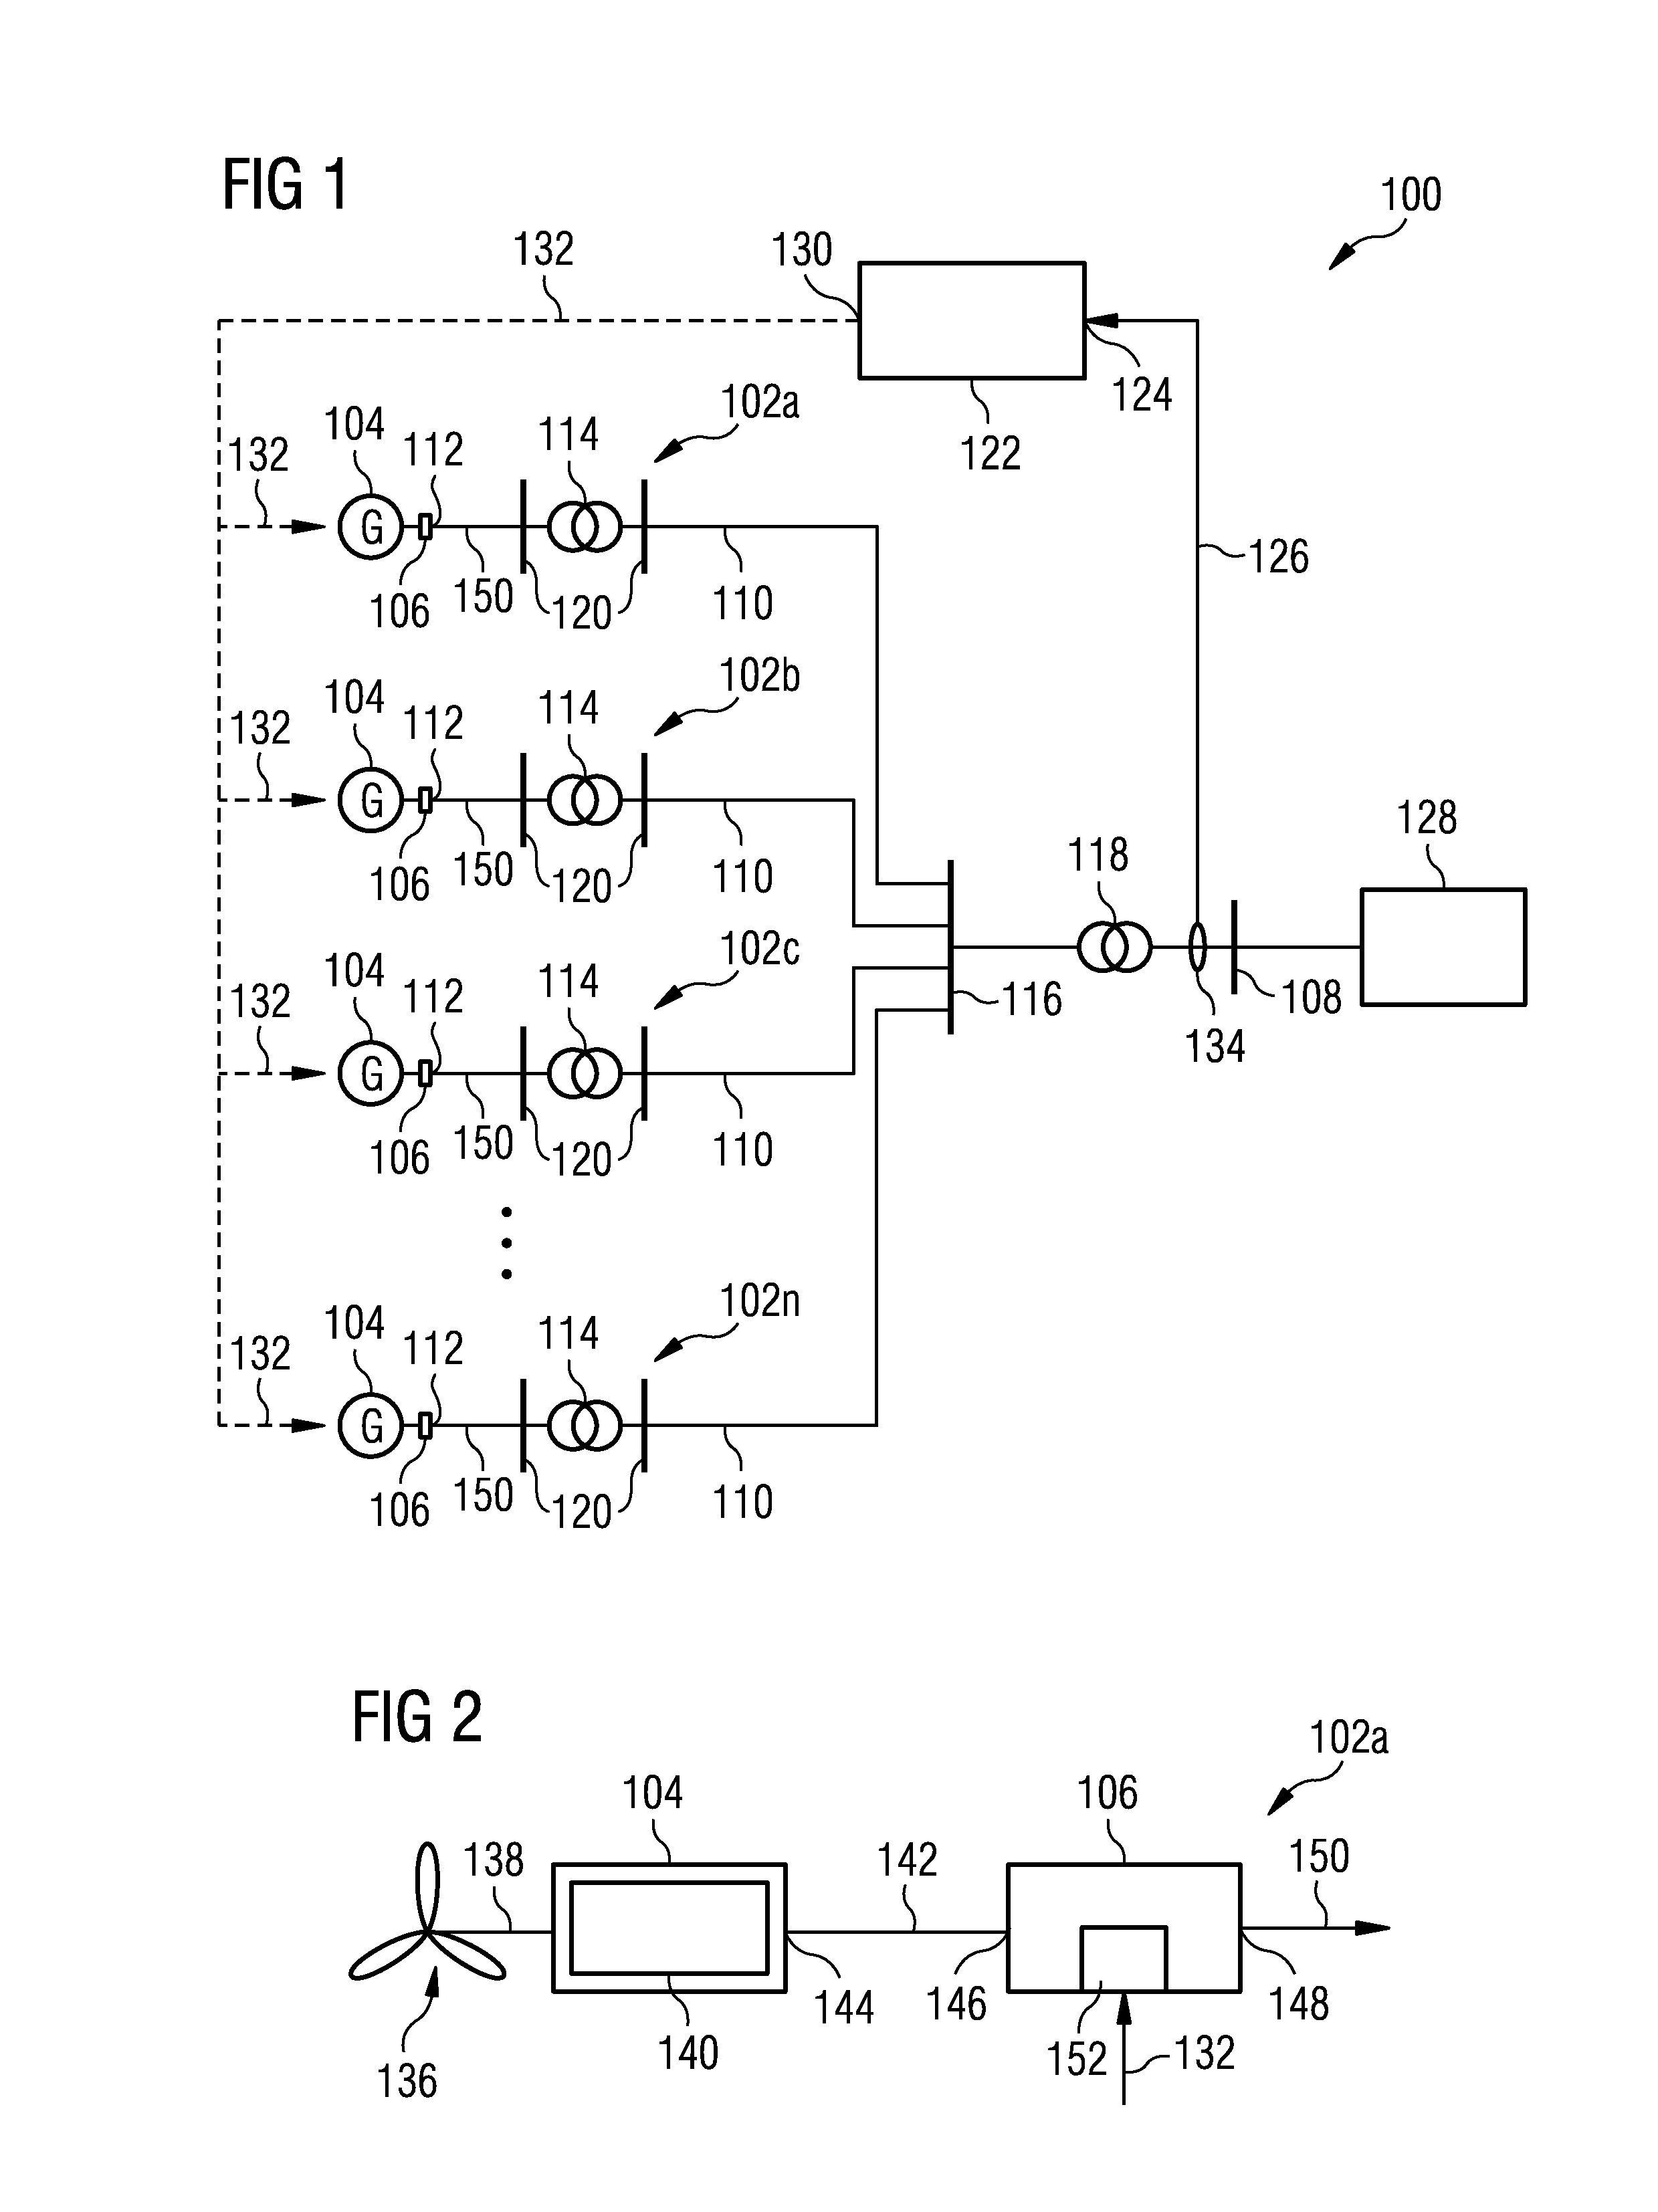 Power oscillation damping by a converter-based power generation device